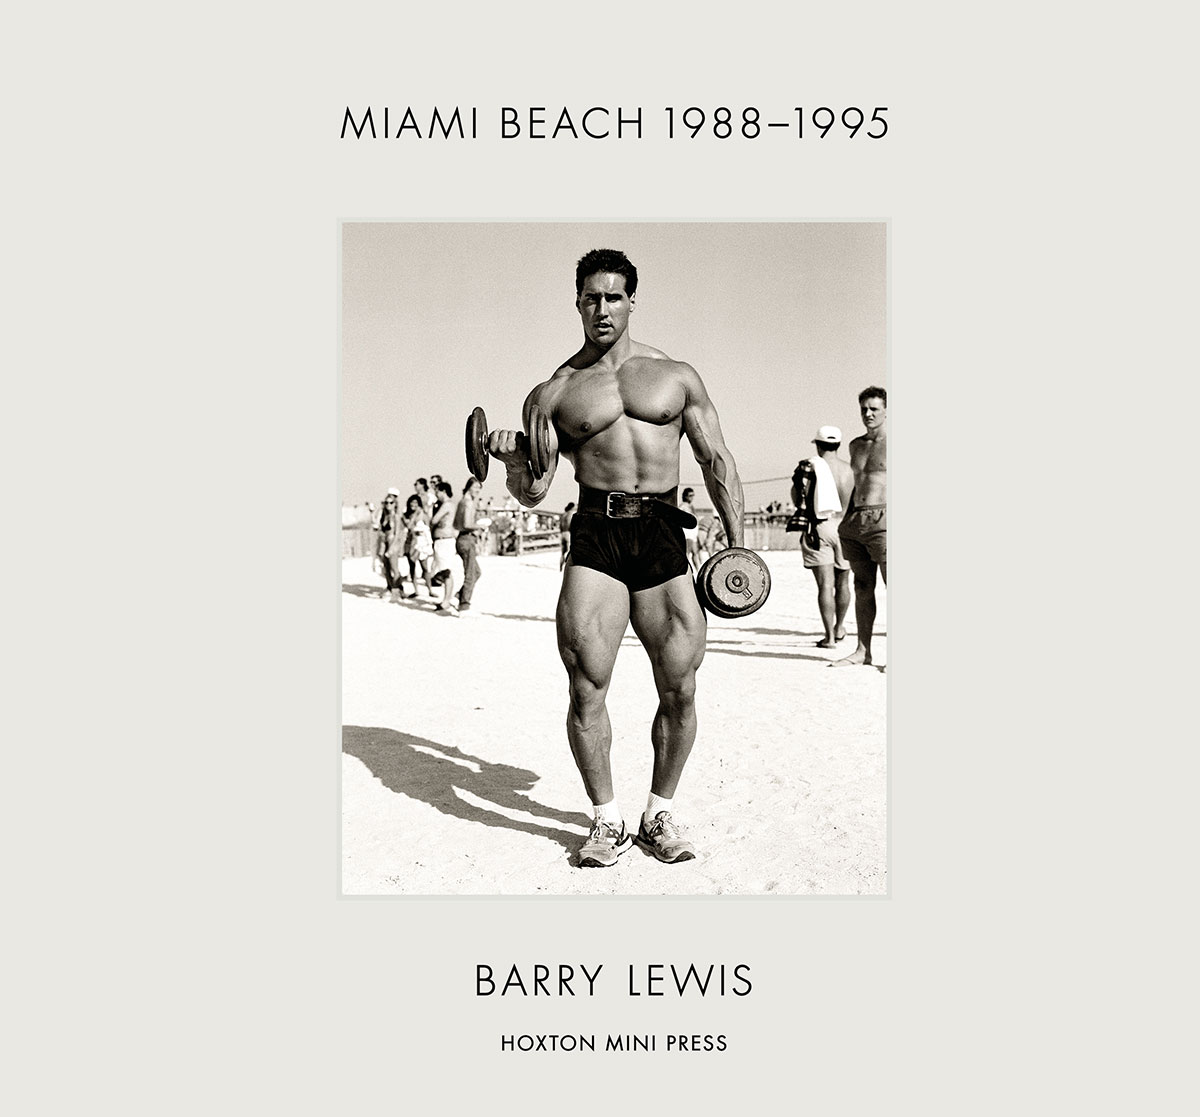 MiamiBeach_Cover_Barry-Lewis